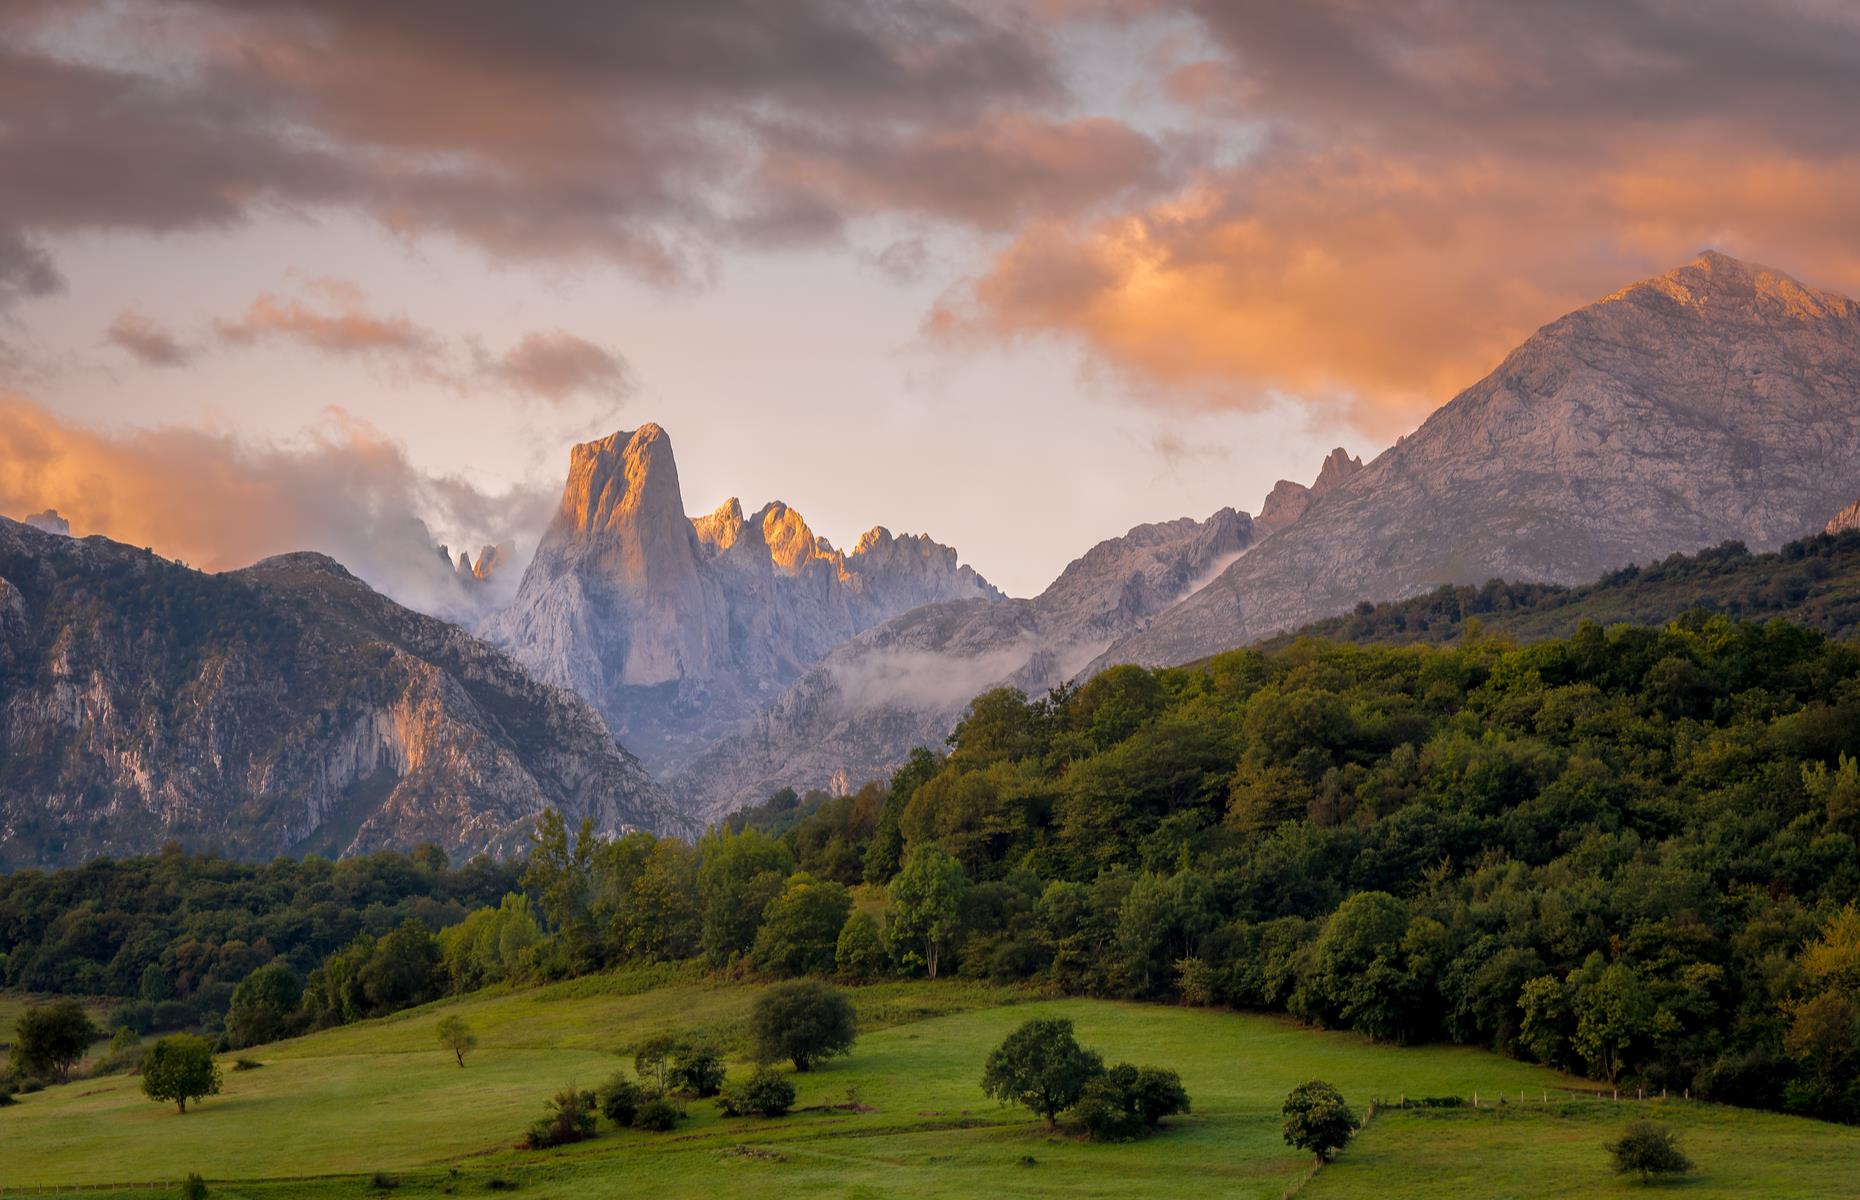 The wilds of the Picos de Europa are heaven for walkers, hikers and climbers of all abilities, but that’s not to say two legs are the only form of transport. In the central section of this compact range, help is at hand in the form of a cable car at Fuente De and a tunnel railway at Bulnes.